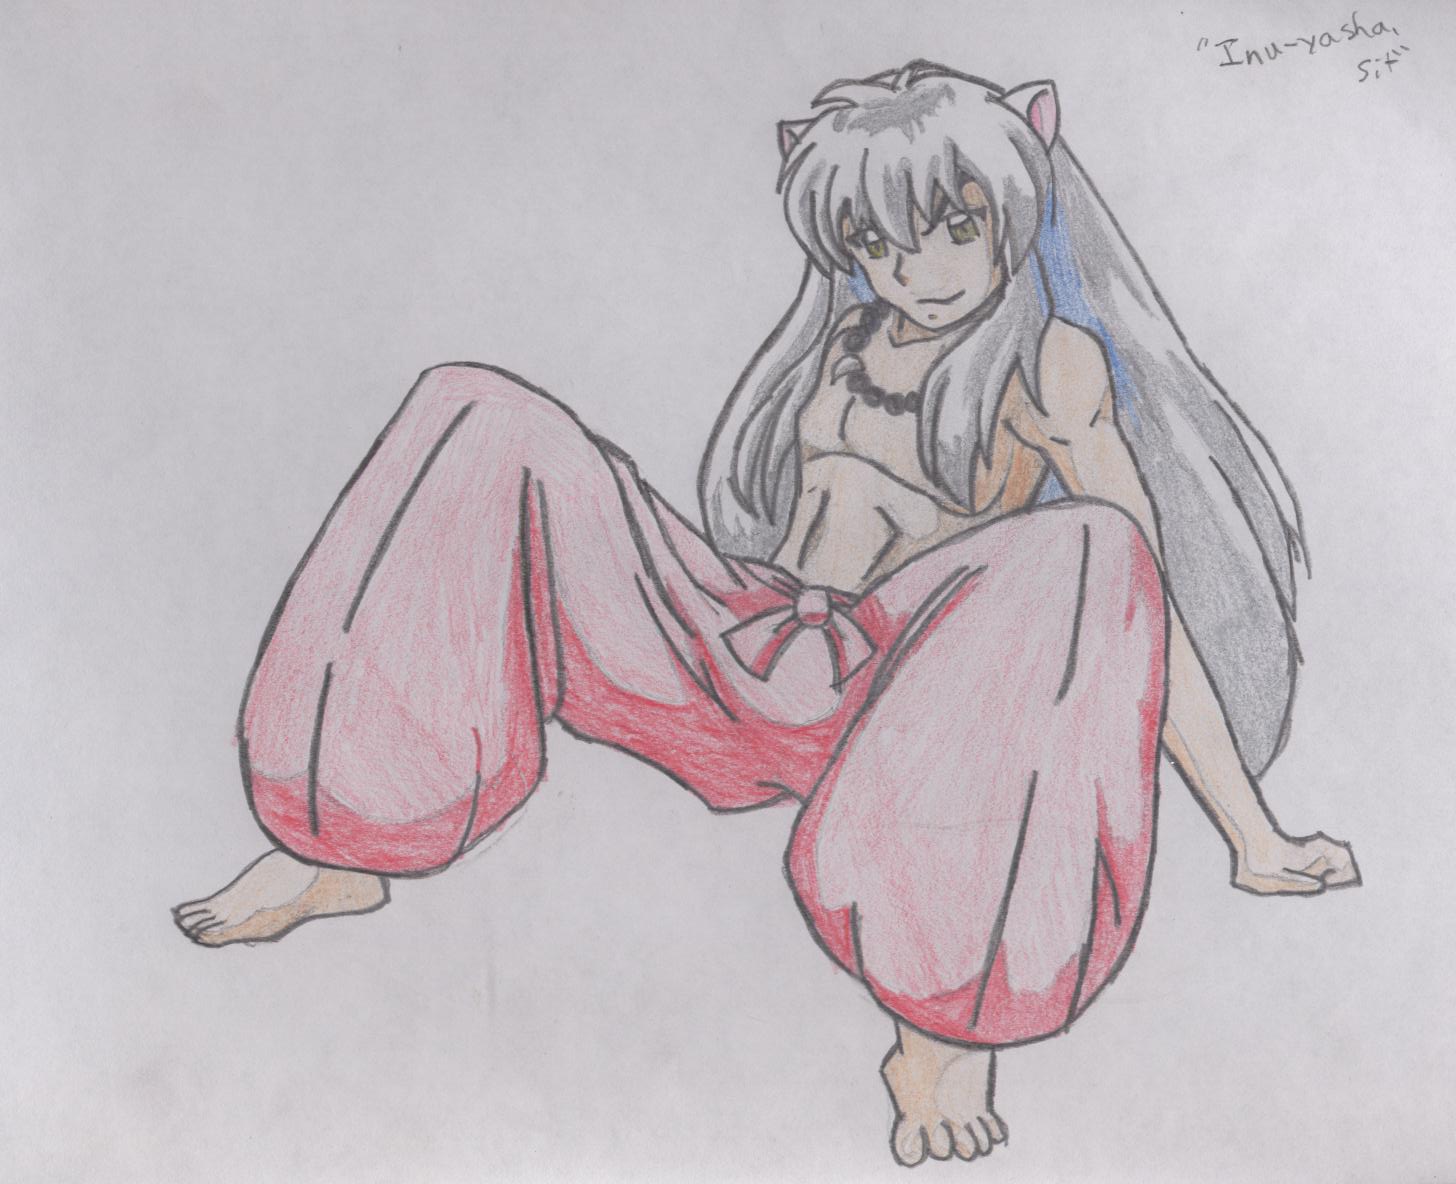 Inuyasha is hot by anime_mangalover